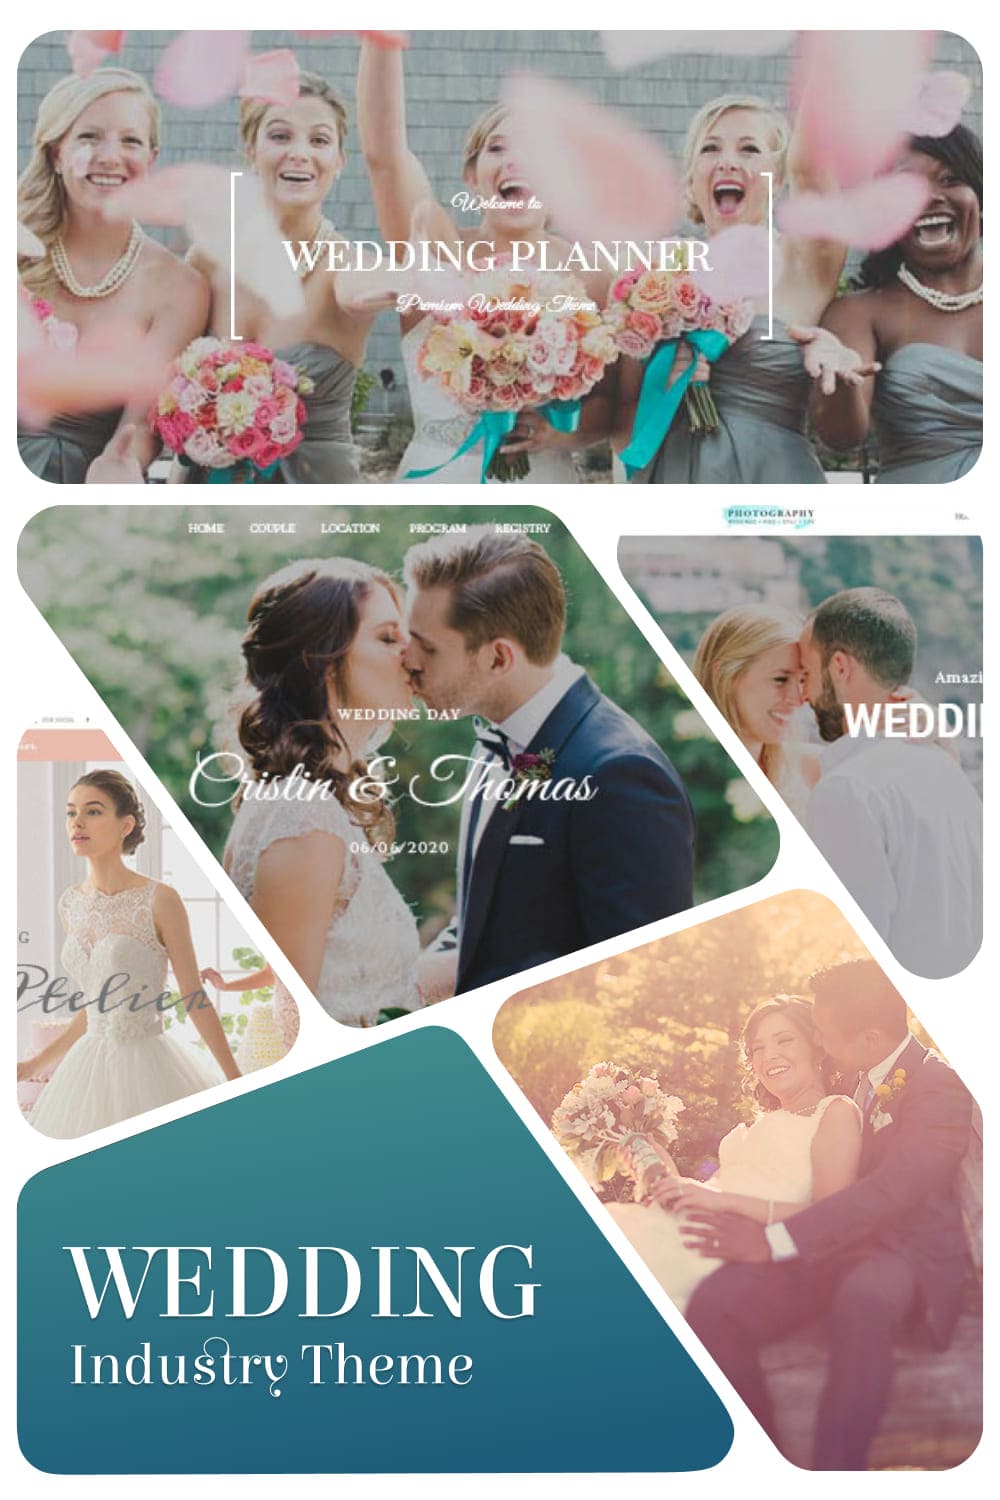 Wedding industry theme, picture for pinterest 1000x1500.